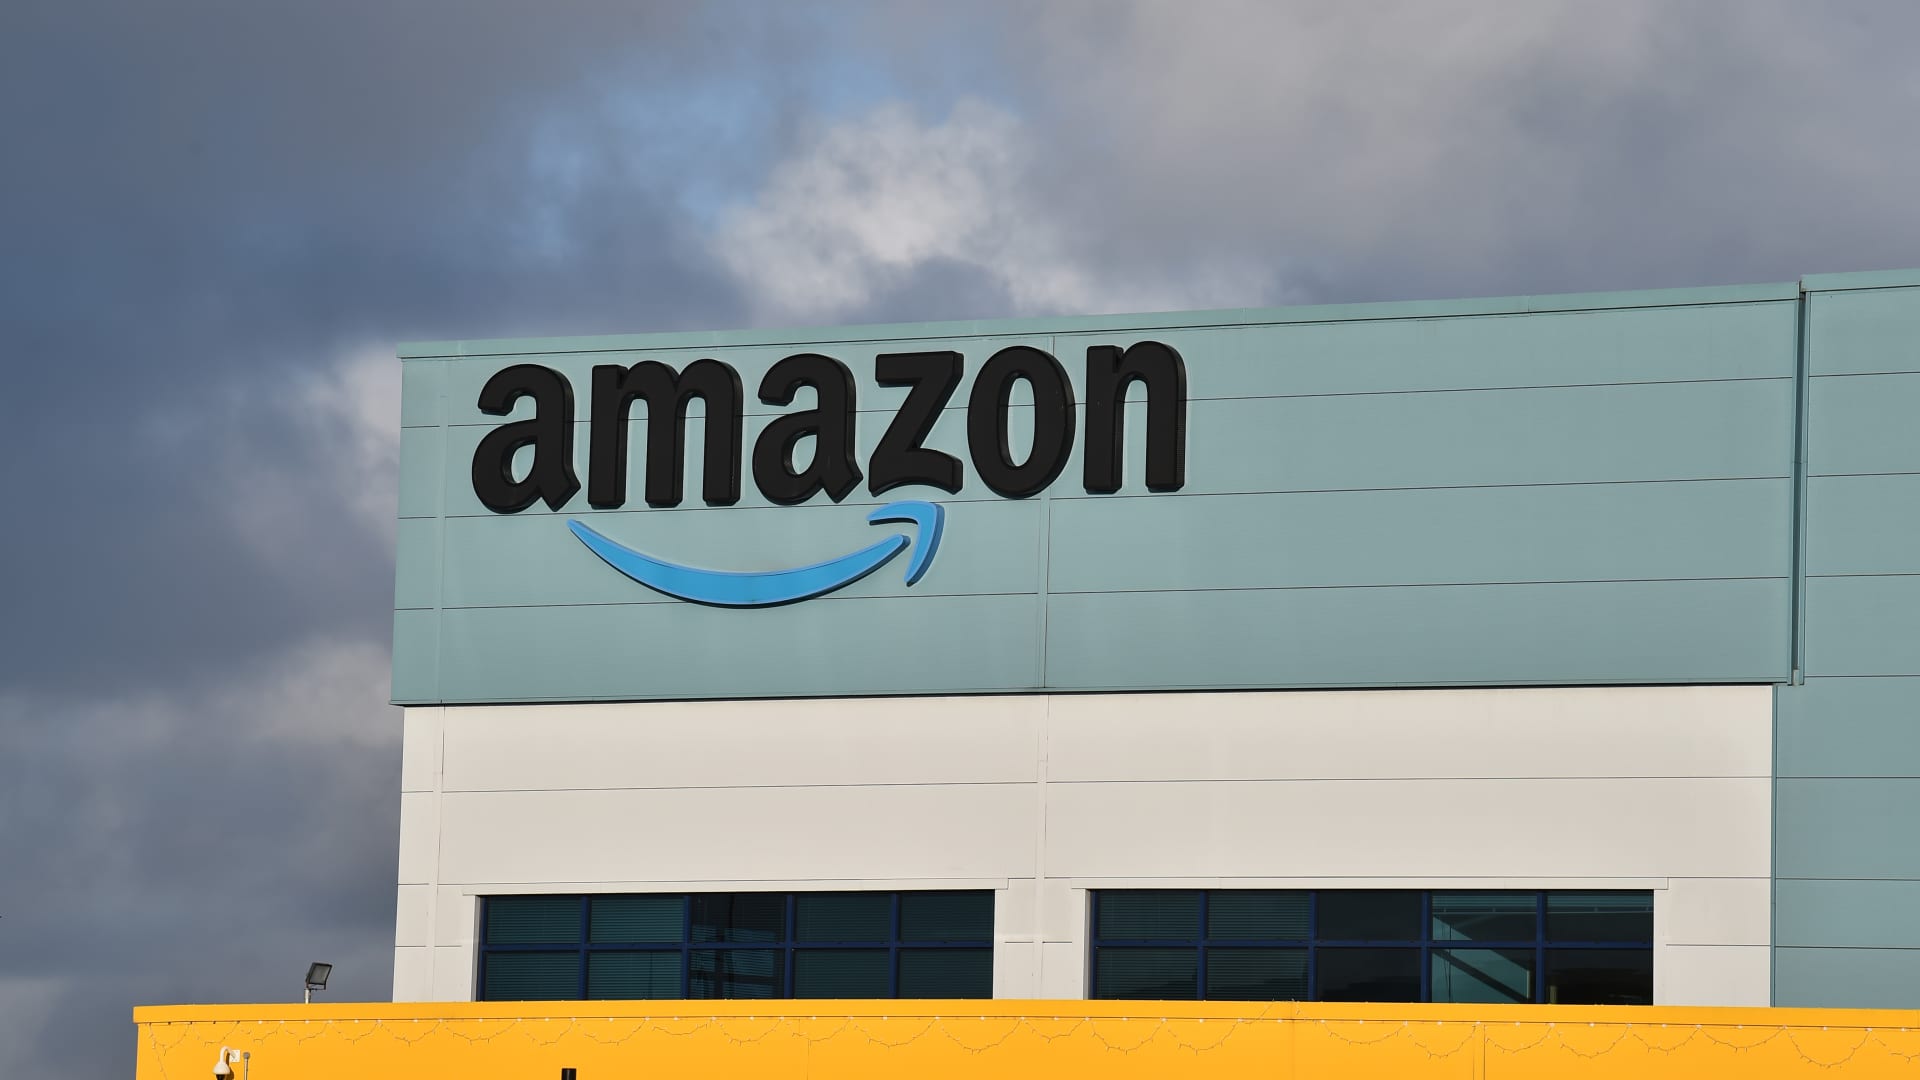 Amazon investigated by UK antitrust watchdog over its marketplace practices